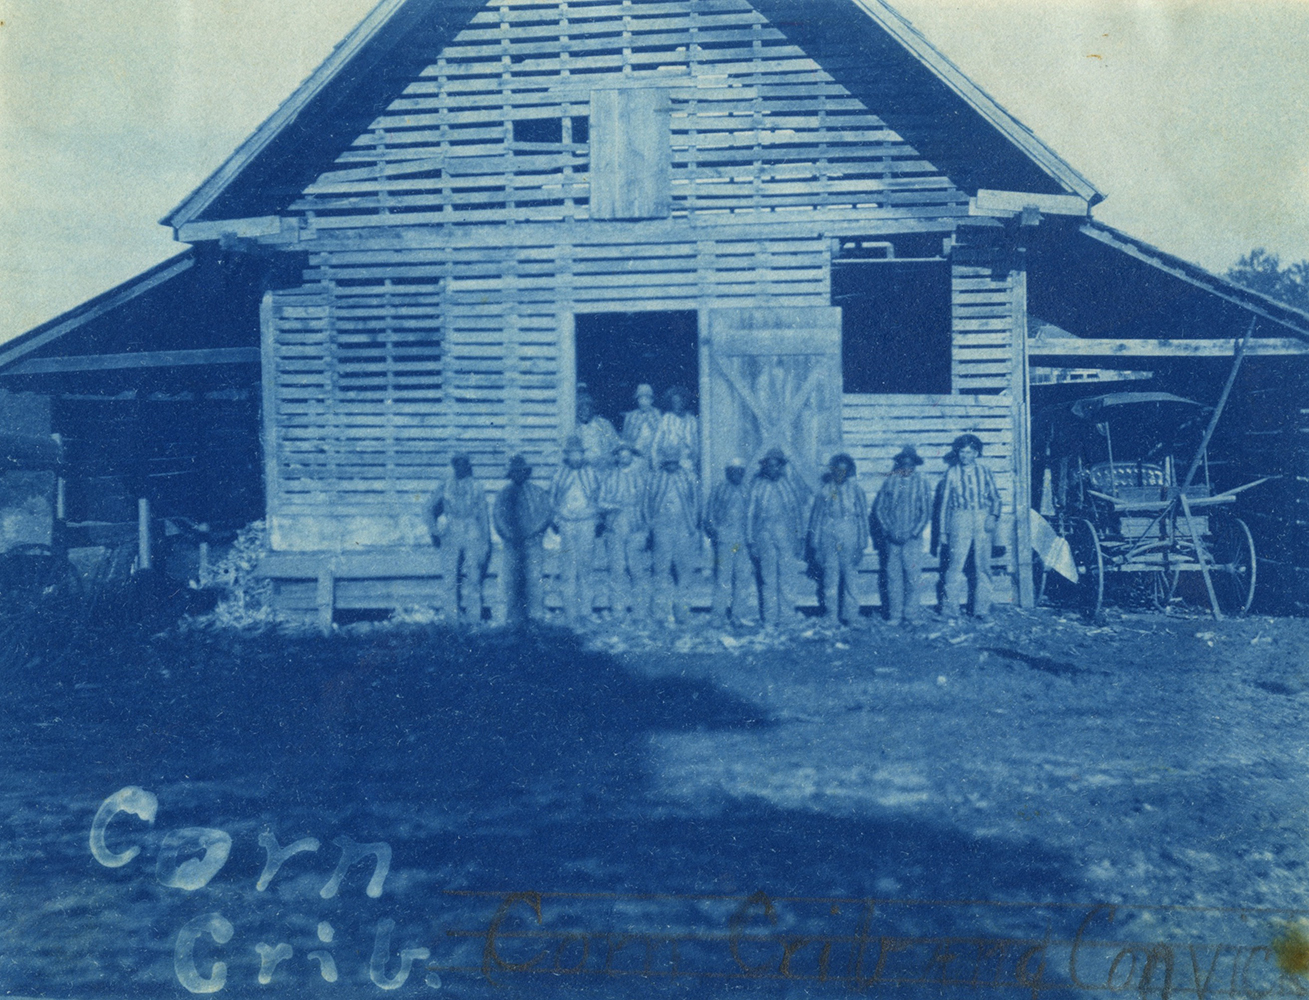 Convicted laborers stand in front of the corn crib at Clemson in 1904.